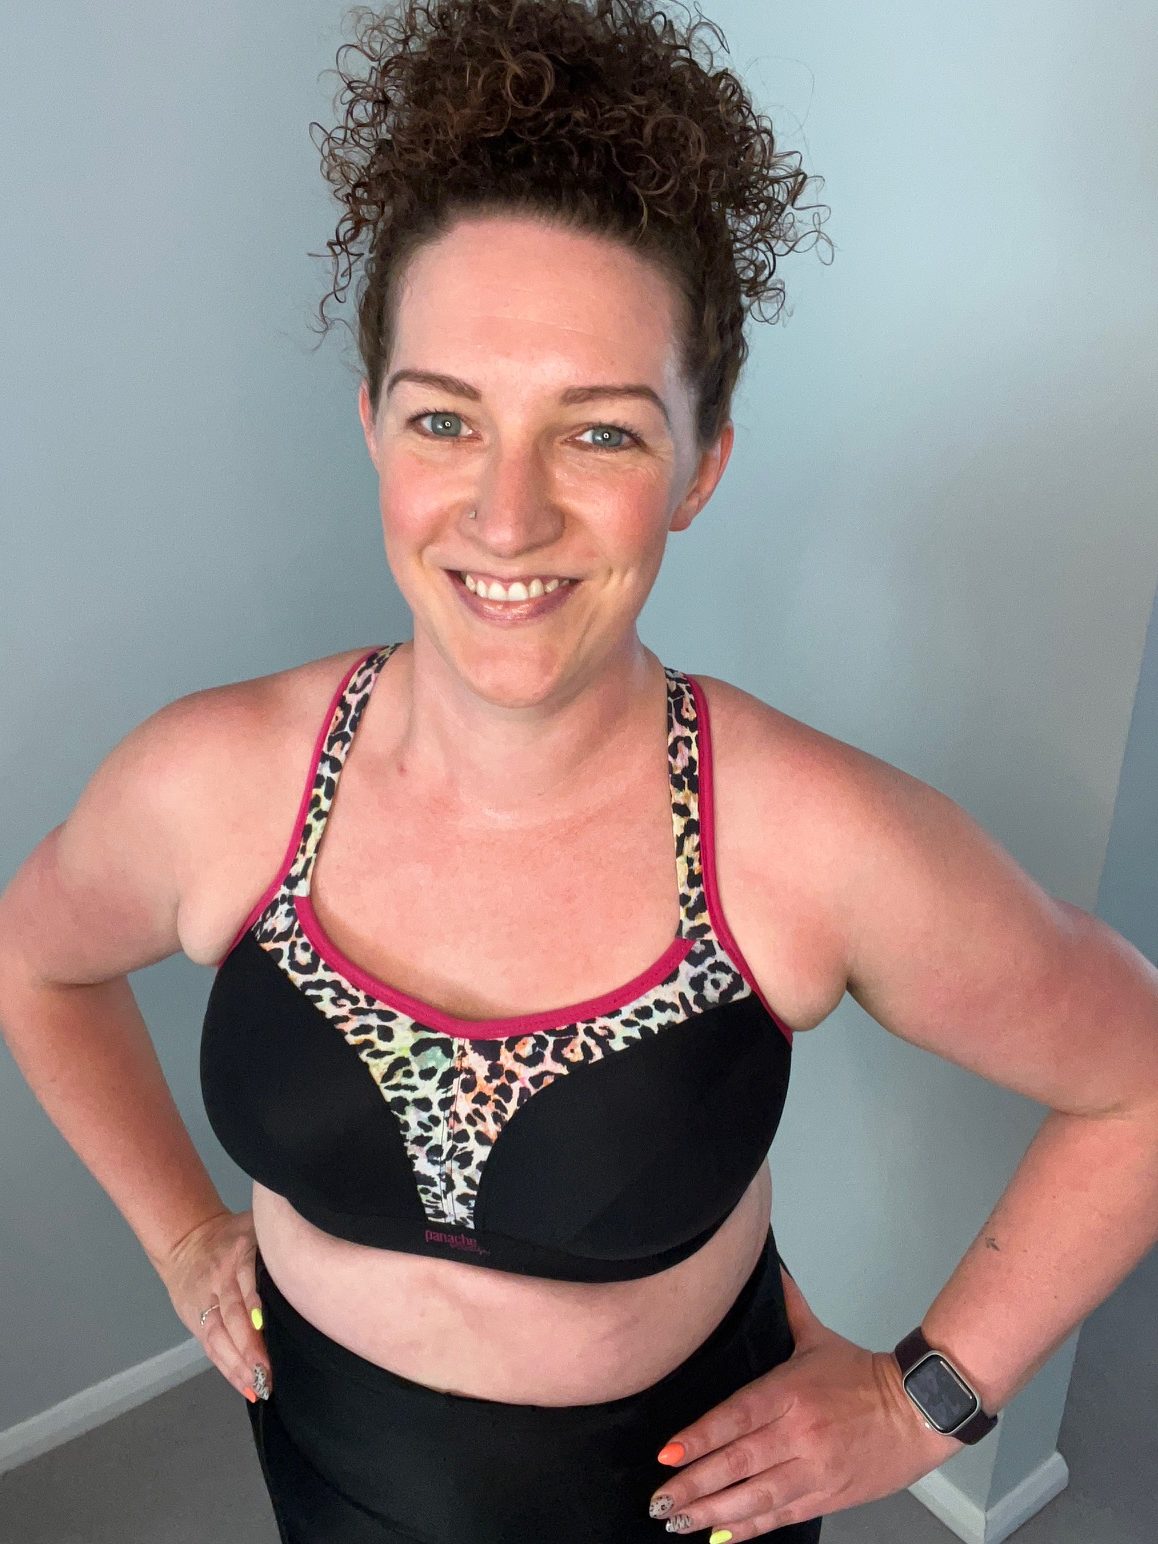 Woman poses in black sports bra with colourful leopard print trim